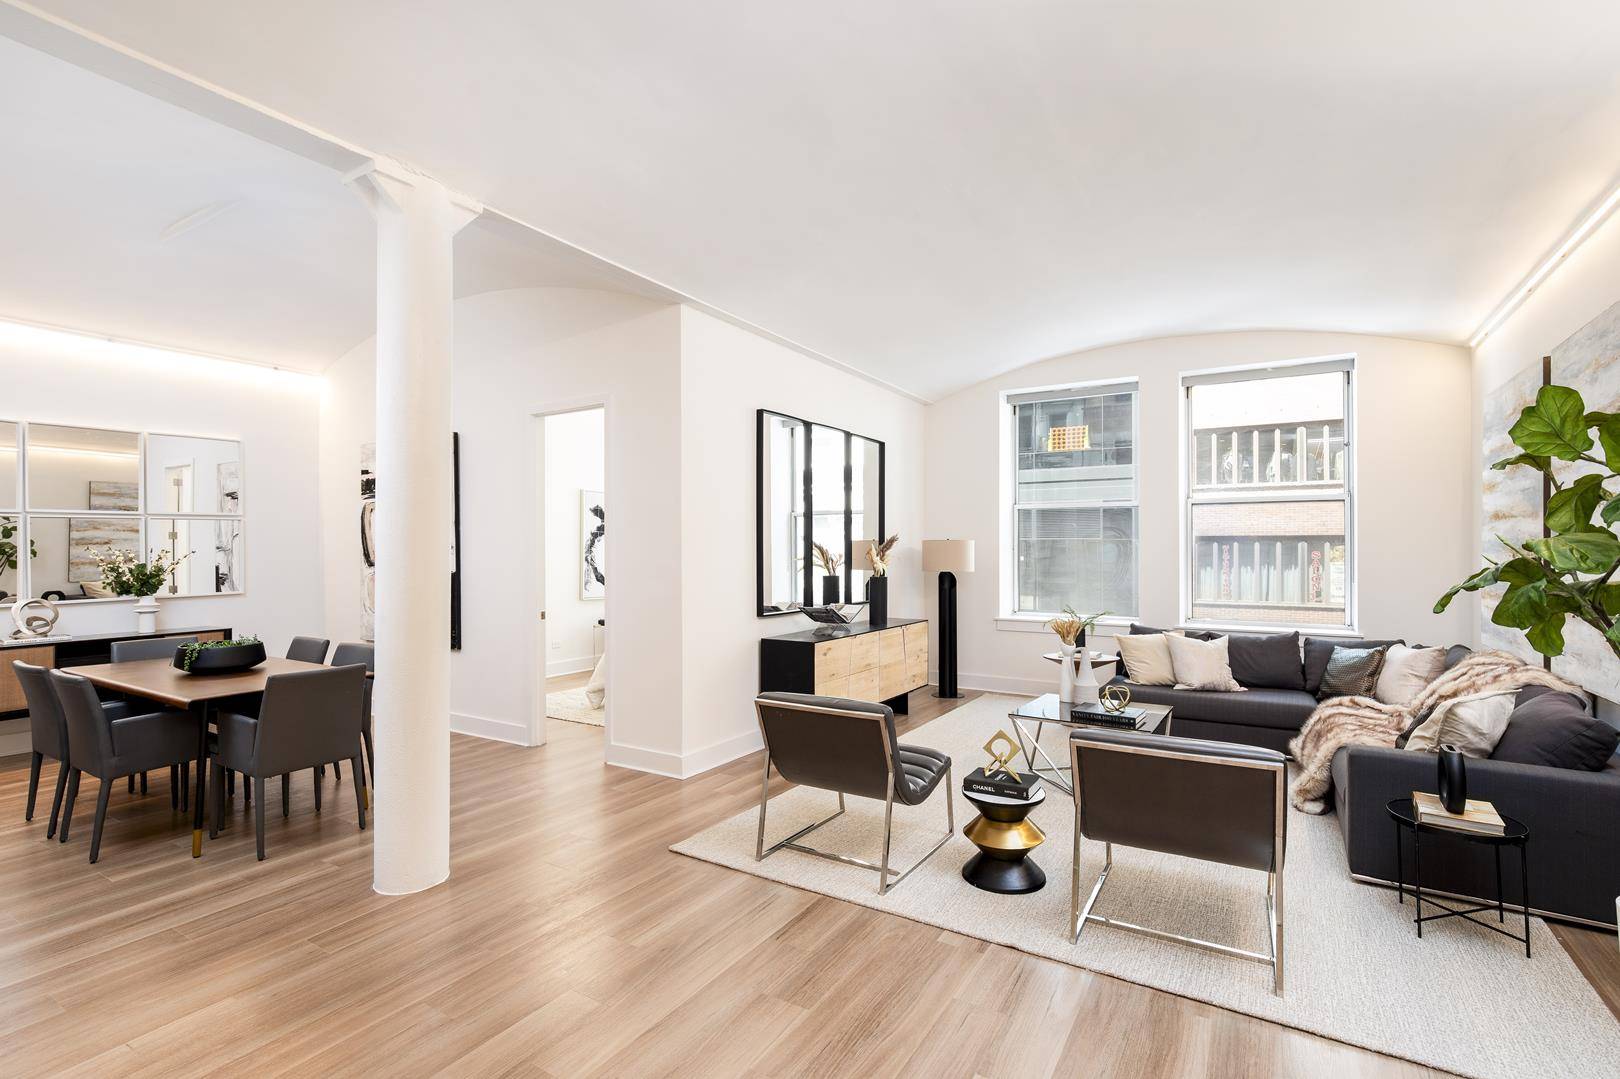 Introducing residence 3A at 130 Fulton street a newly renovated ONE BED HOME OFFICE or second bedroom apartment with soaring barrel vaulted ceilings.